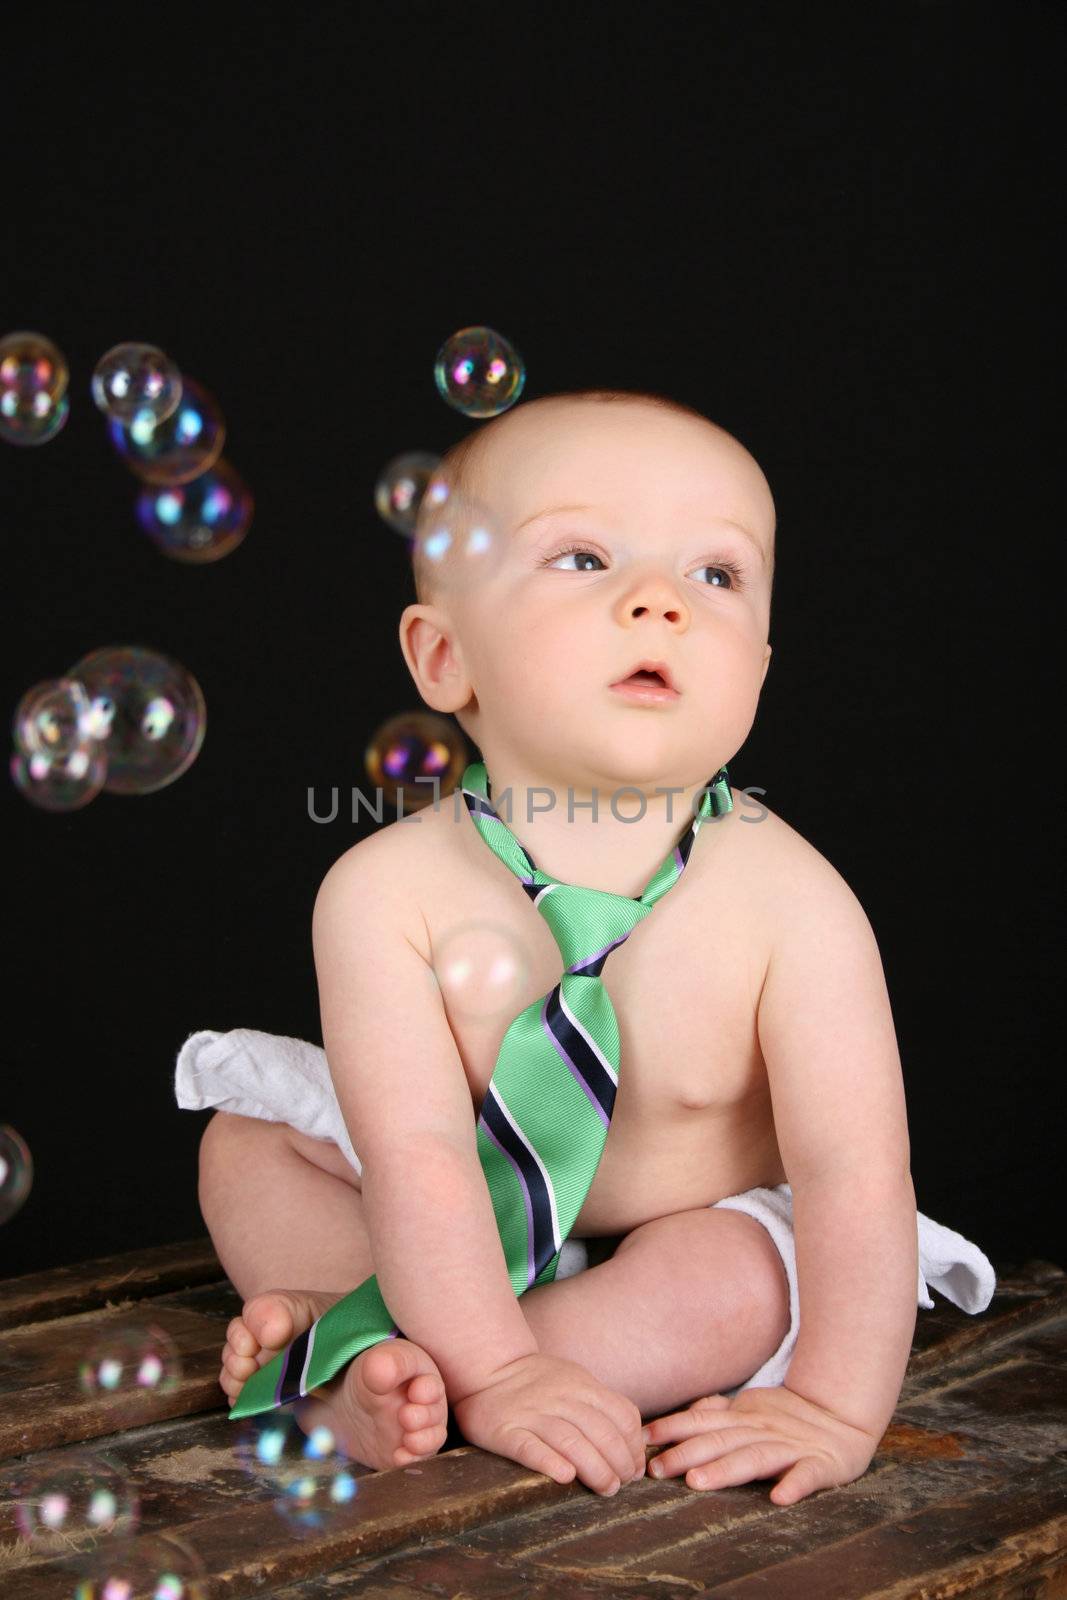 Baby Bubbles by vanell